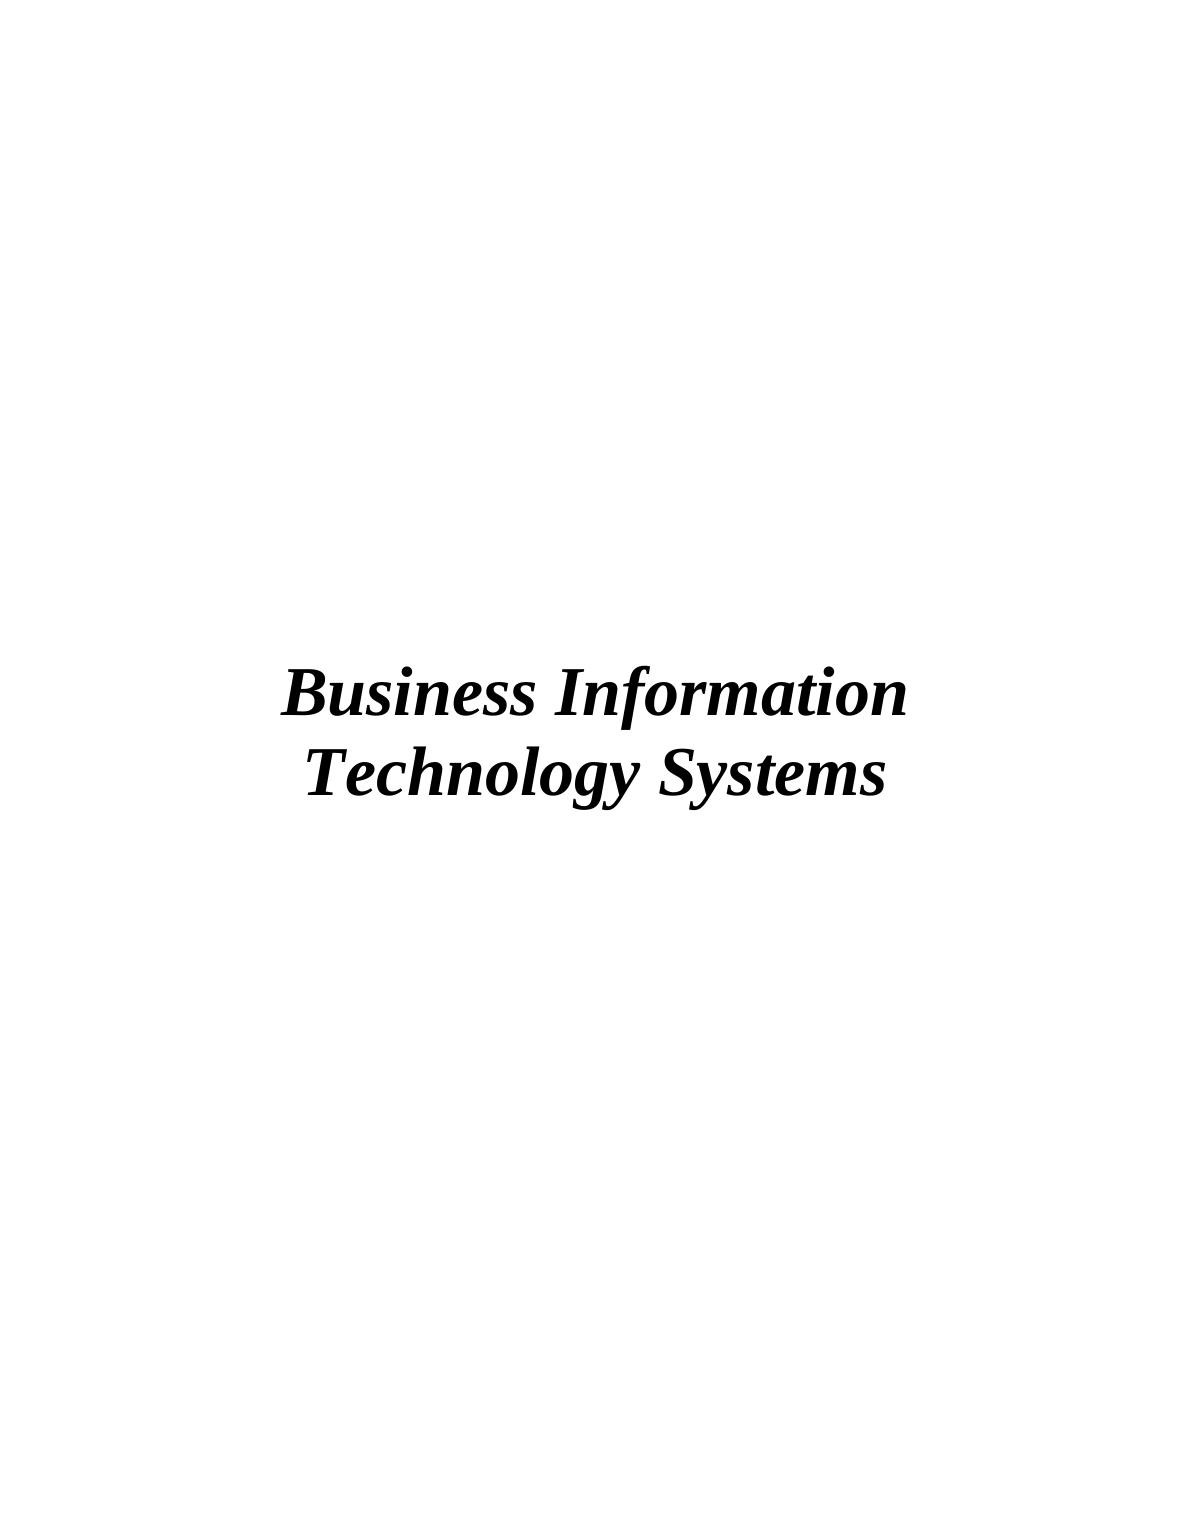 Business Information Technology Systems Assignment Solved - JS supermarket_1